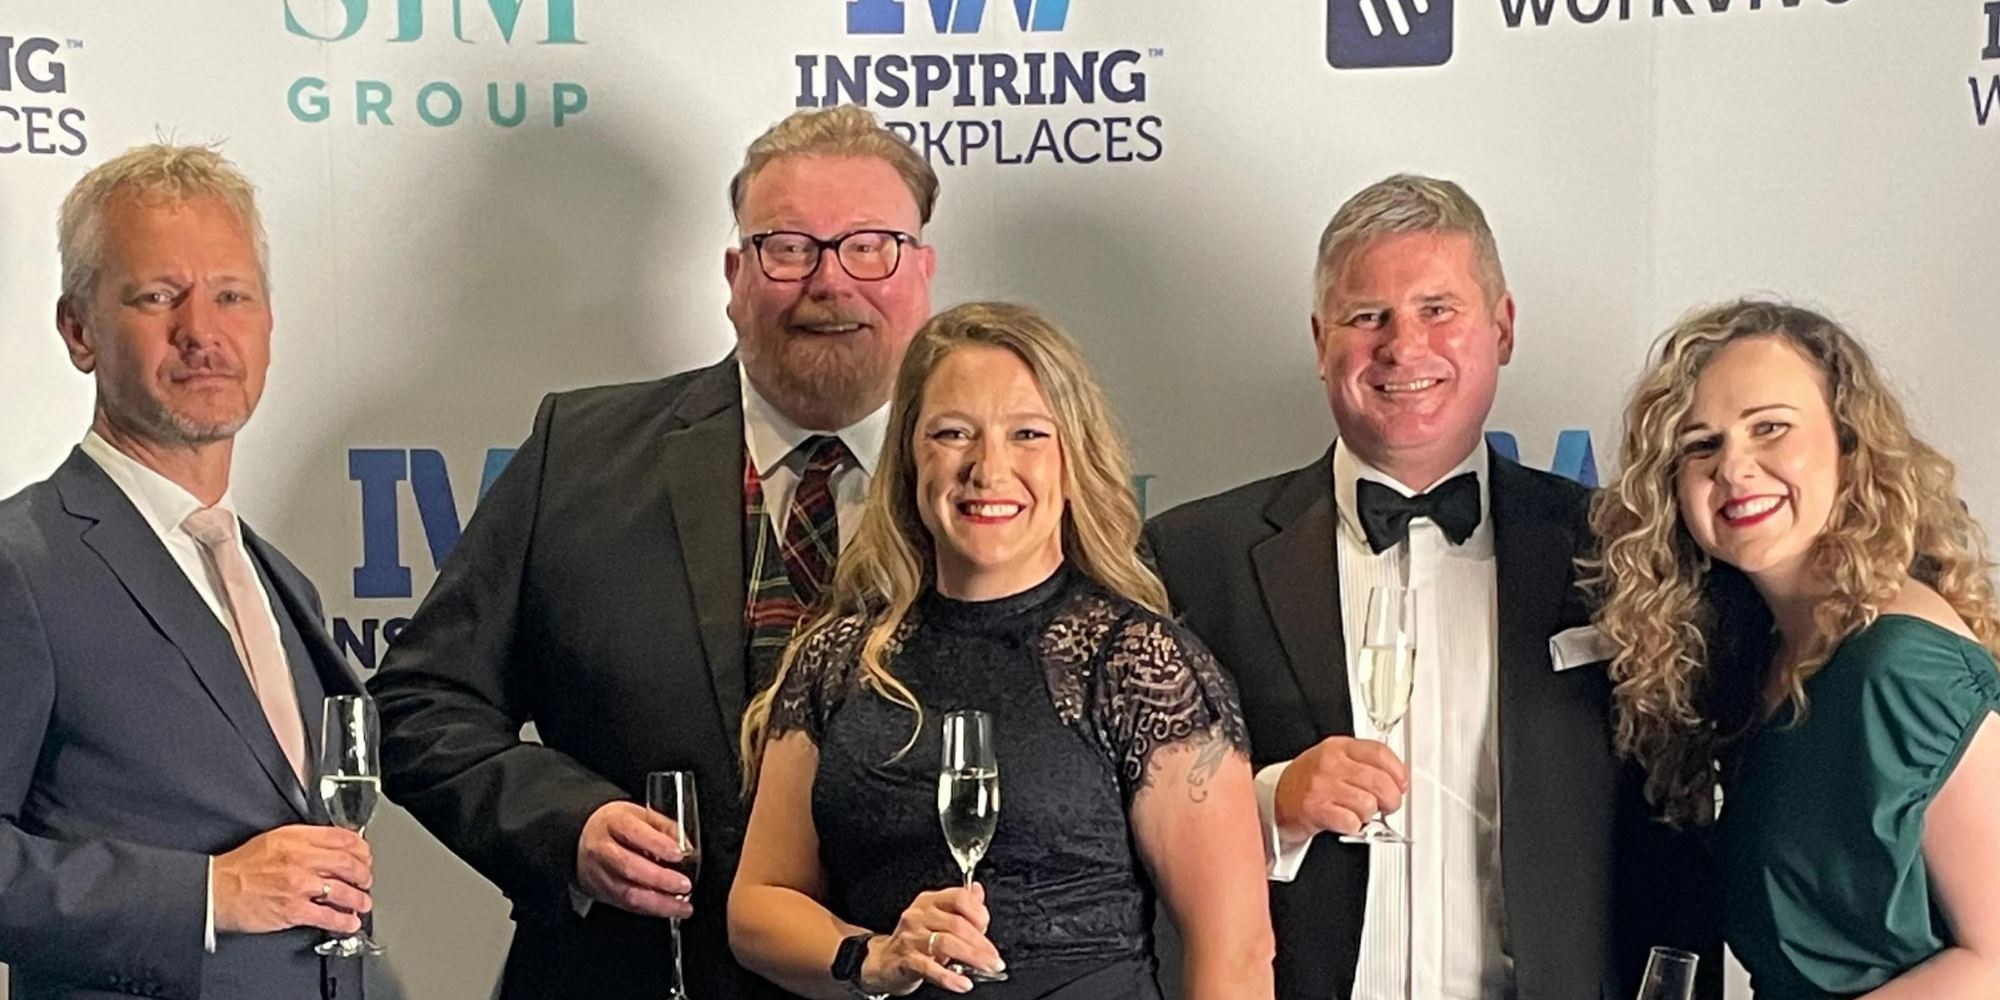 TimeXtender team at Inspiring Workplaces gala celebrating recognition demonstrating ideas within post about 3 Top Tips for Future of Work Success